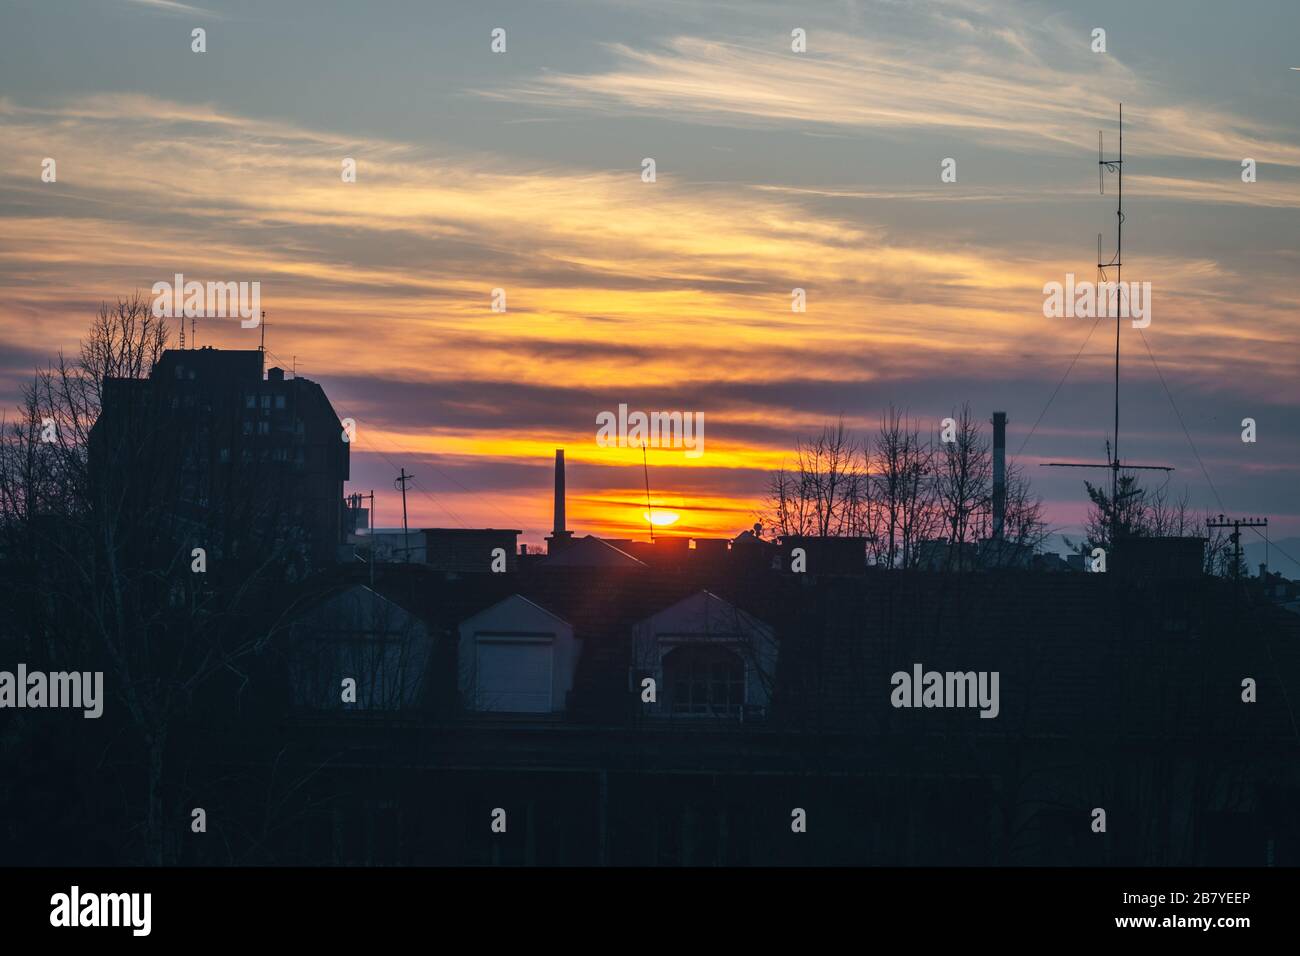 Sunrise over rooftops in Serbia Stock Photo